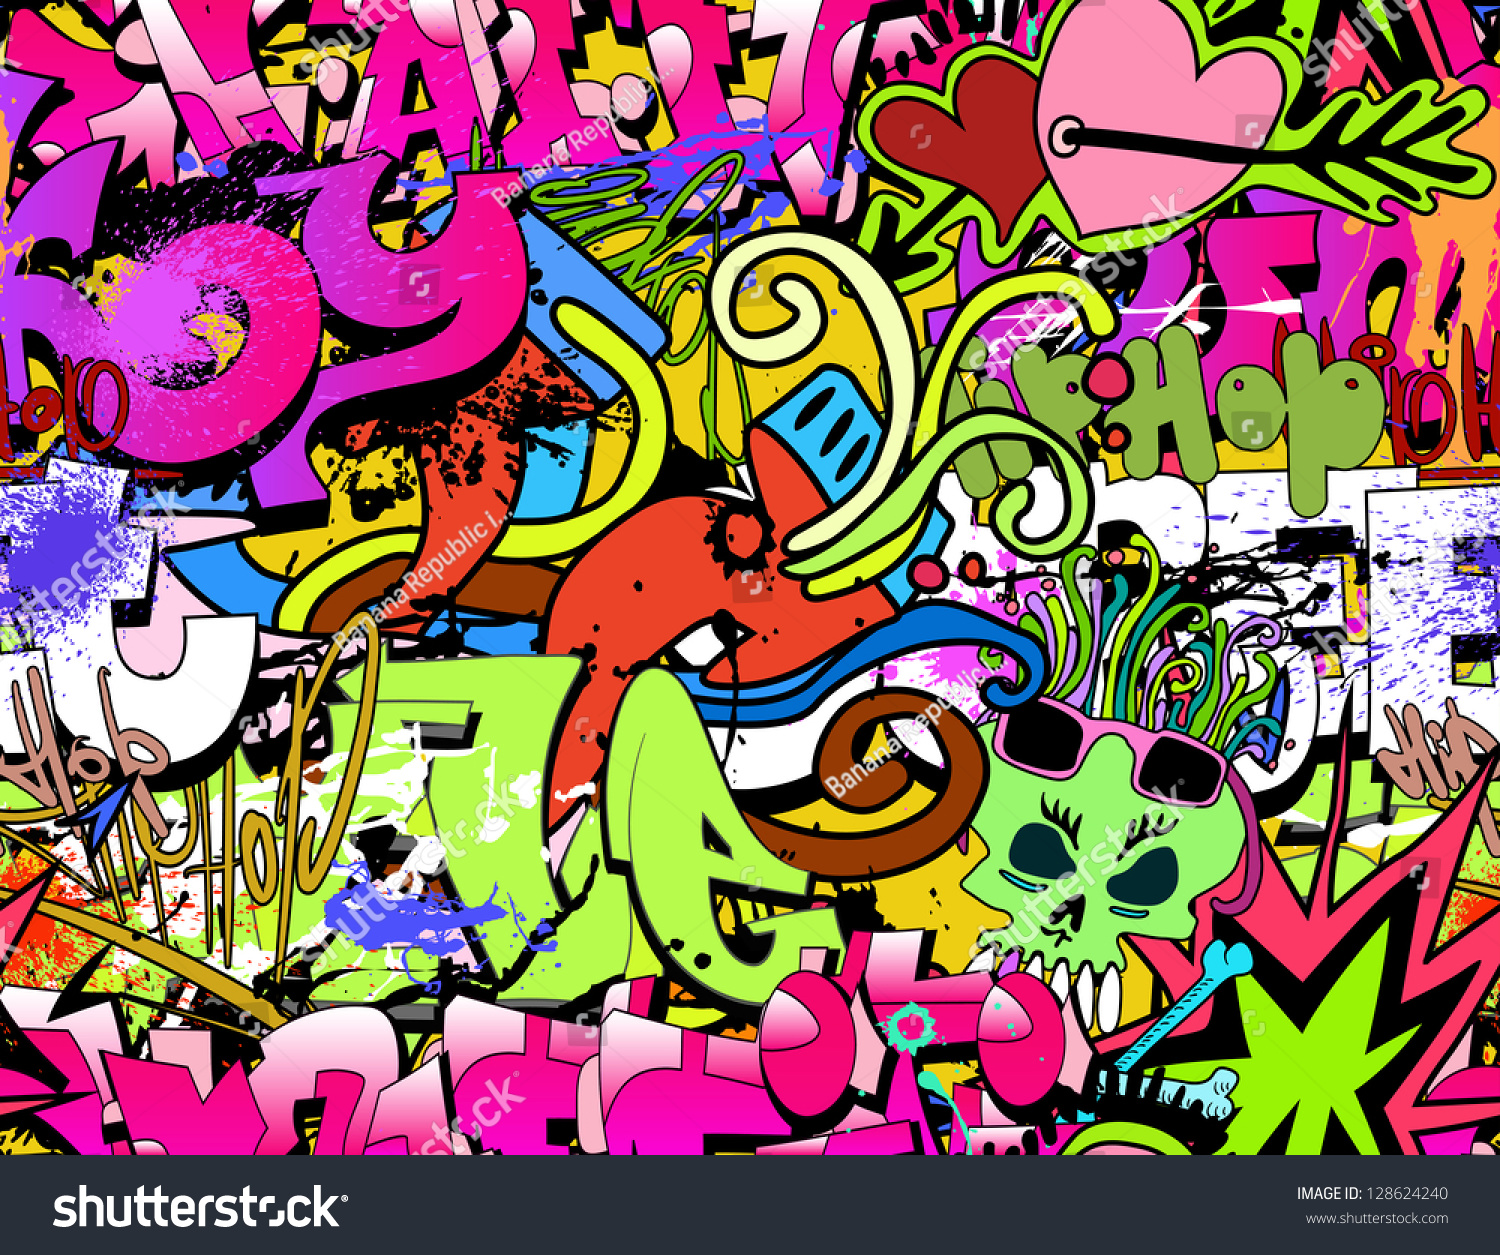 Graffiti Wall Art Background Hiphop Style Stock Vector ...